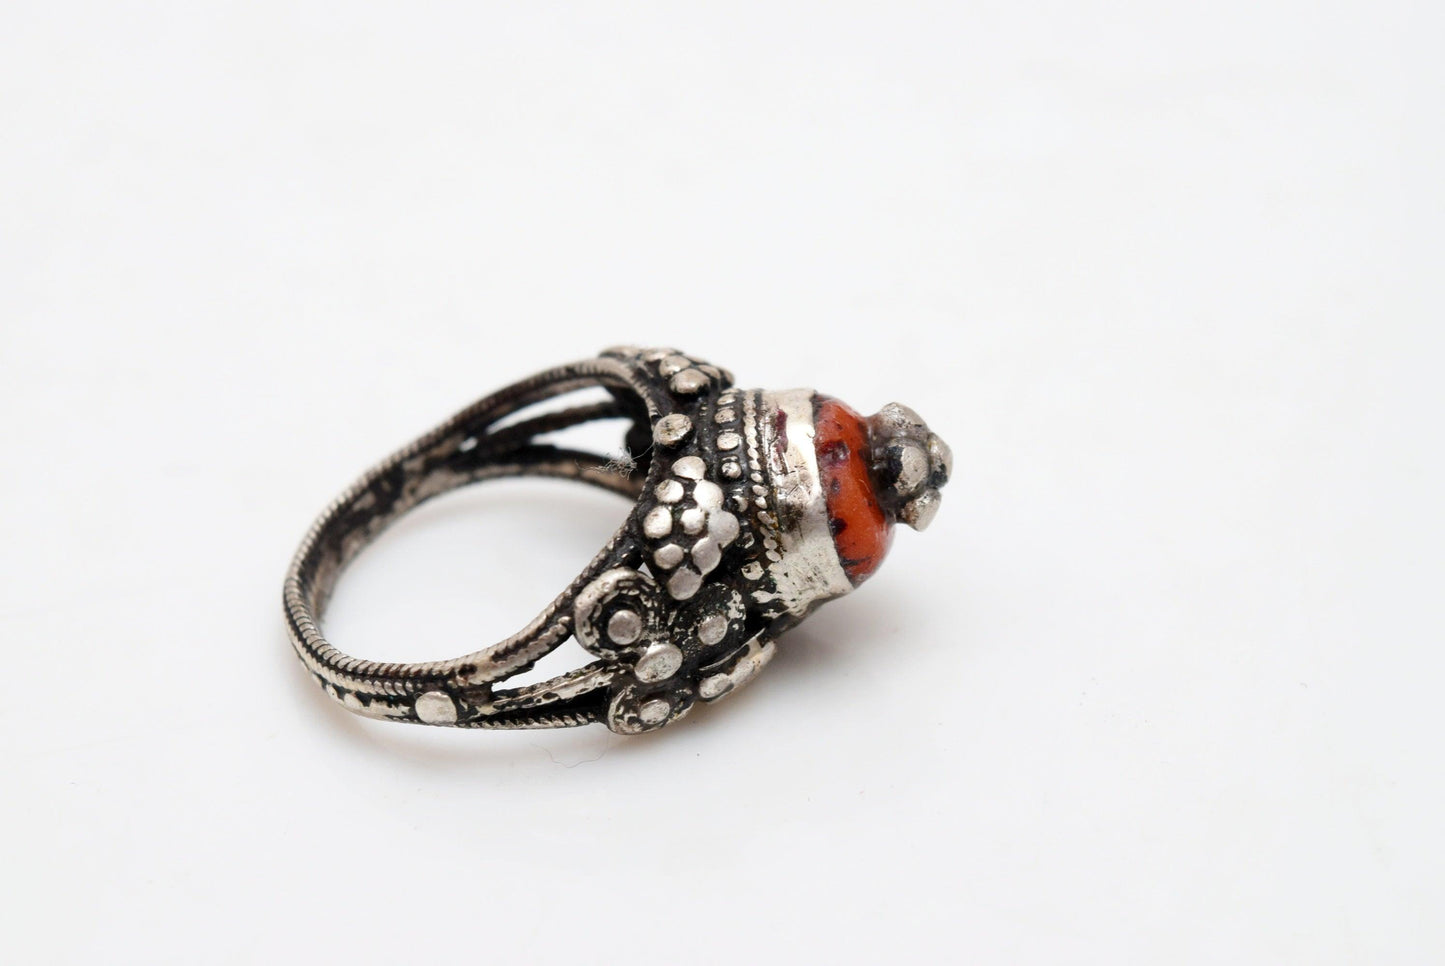 Vintage Coral and Silver Tower Ring from the Yemen Size 8 3/4 - Anteeka